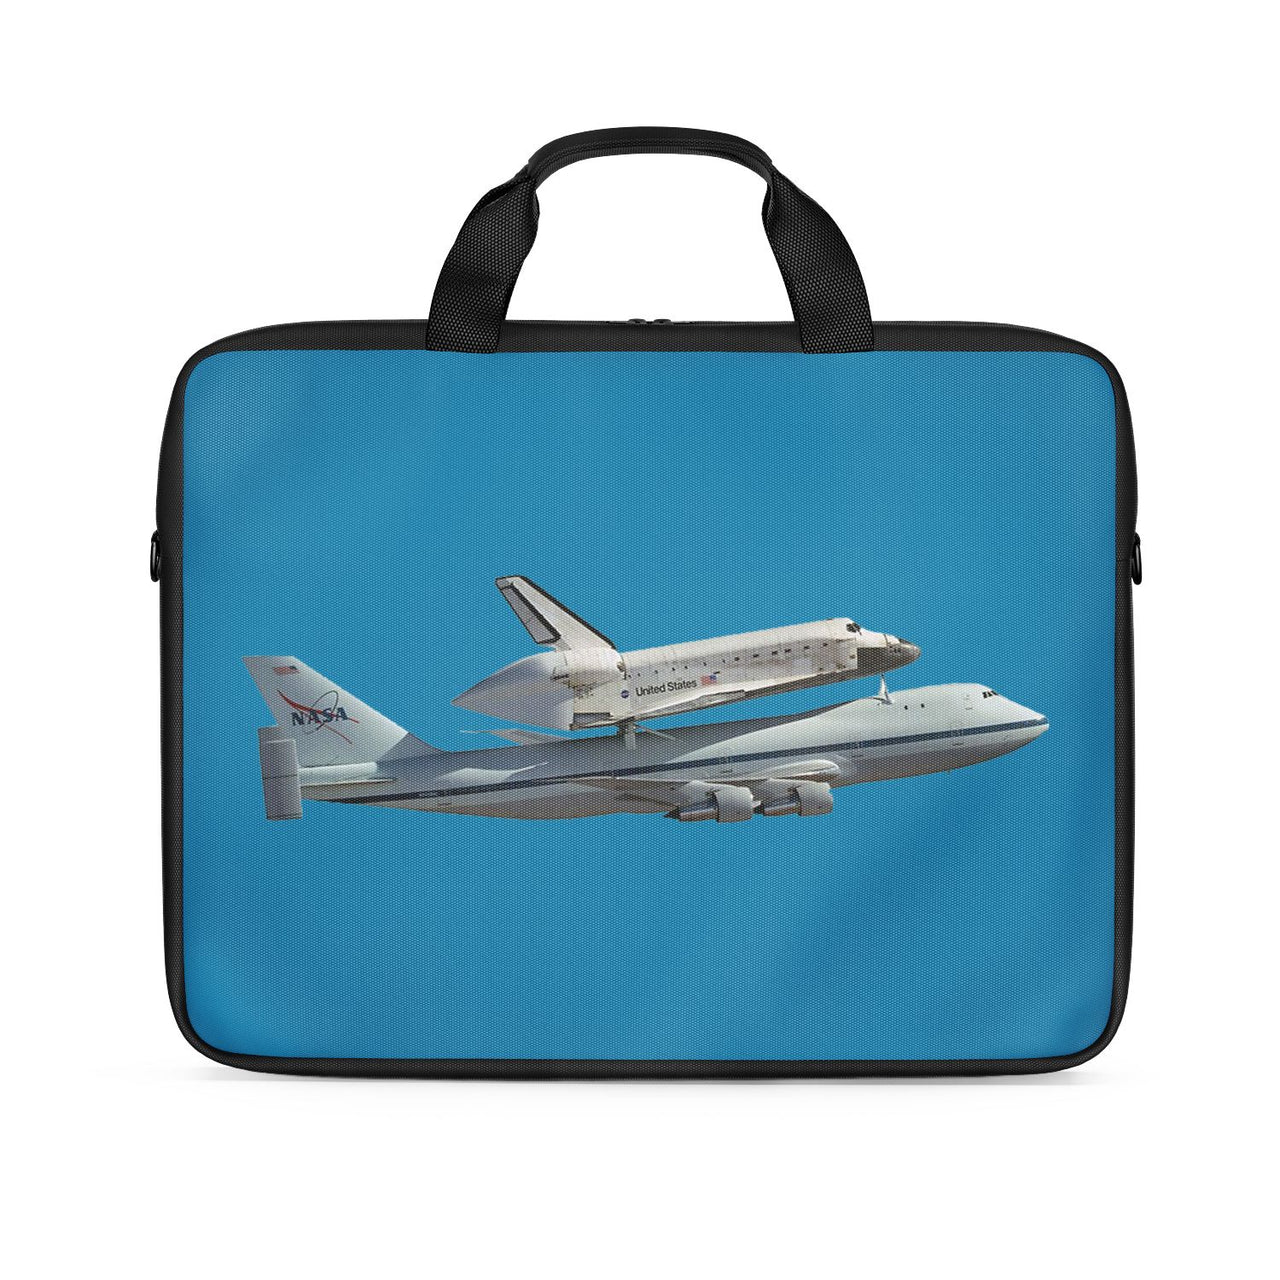 Space shuttle on 747 Designed Laptop & Tablet Bags